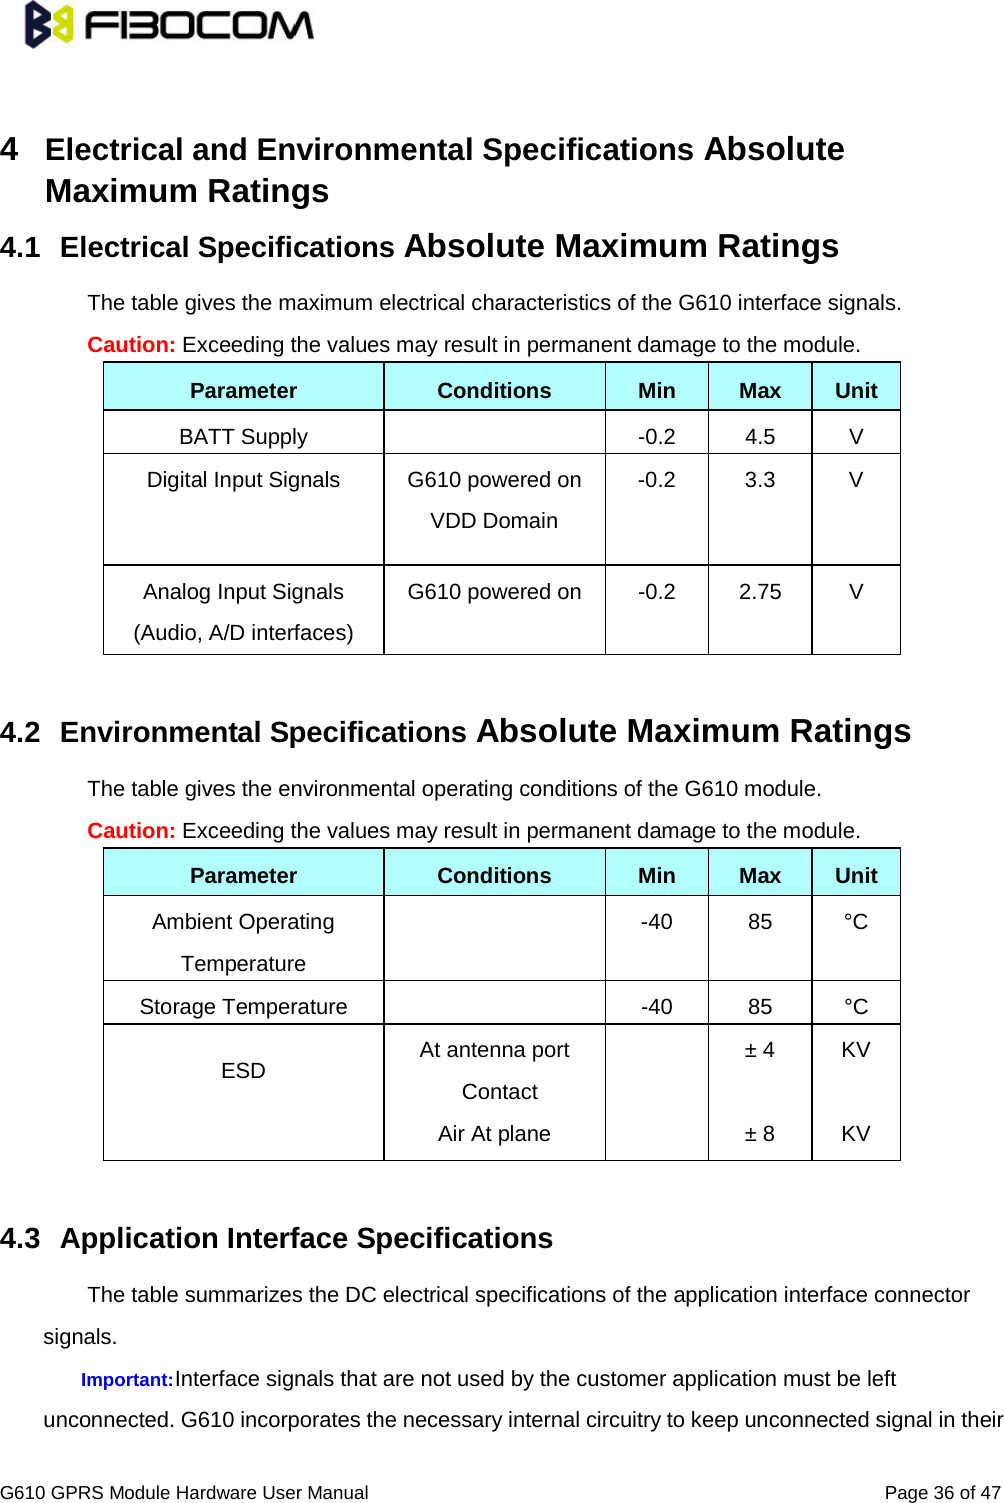                                                                               G610 GPRS Module Hardware User Manual                                                          Page 36 of 47   4  Electrical and Environmental Specifications Absolute Maximum Ratings   4.1 Electrical Specifications Absolute Maximum Ratings The table gives the maximum electrical characteristics of the G610 interface signals.   Caution: Exceeding the values may result in permanent damage to the module.   Parameter Conditions Min Max Unit BATT Supply    -0.2 4.5  V Digital Input Signals G610 powered on VDD Domain -0.2 3.3  V Analog Input Signals (Audio, A/D interfaces) G610 powered on  -0.2 2.75  V  4.2 Environmental Specifications Absolute Maximum Ratings The table gives the environmental operating conditions of the G610 module.   Caution: Exceeding the values may result in permanent damage to the module.   Parameter Conditions Min Max Unit Ambient Operating Temperature   -40 85 °C Storage Temperature    -40 85 °C ESD At antenna port  Contact  ± 4 KV  Air At plane    ± 8 KV  4.3 Application Interface Specifications   The table summarizes the DC electrical specifications of the application interface connector signals.   Important: Interface signals that are not used by the customer application must be left unconnected. G610 incorporates the necessary internal circuitry to keep unconnected signal in their 